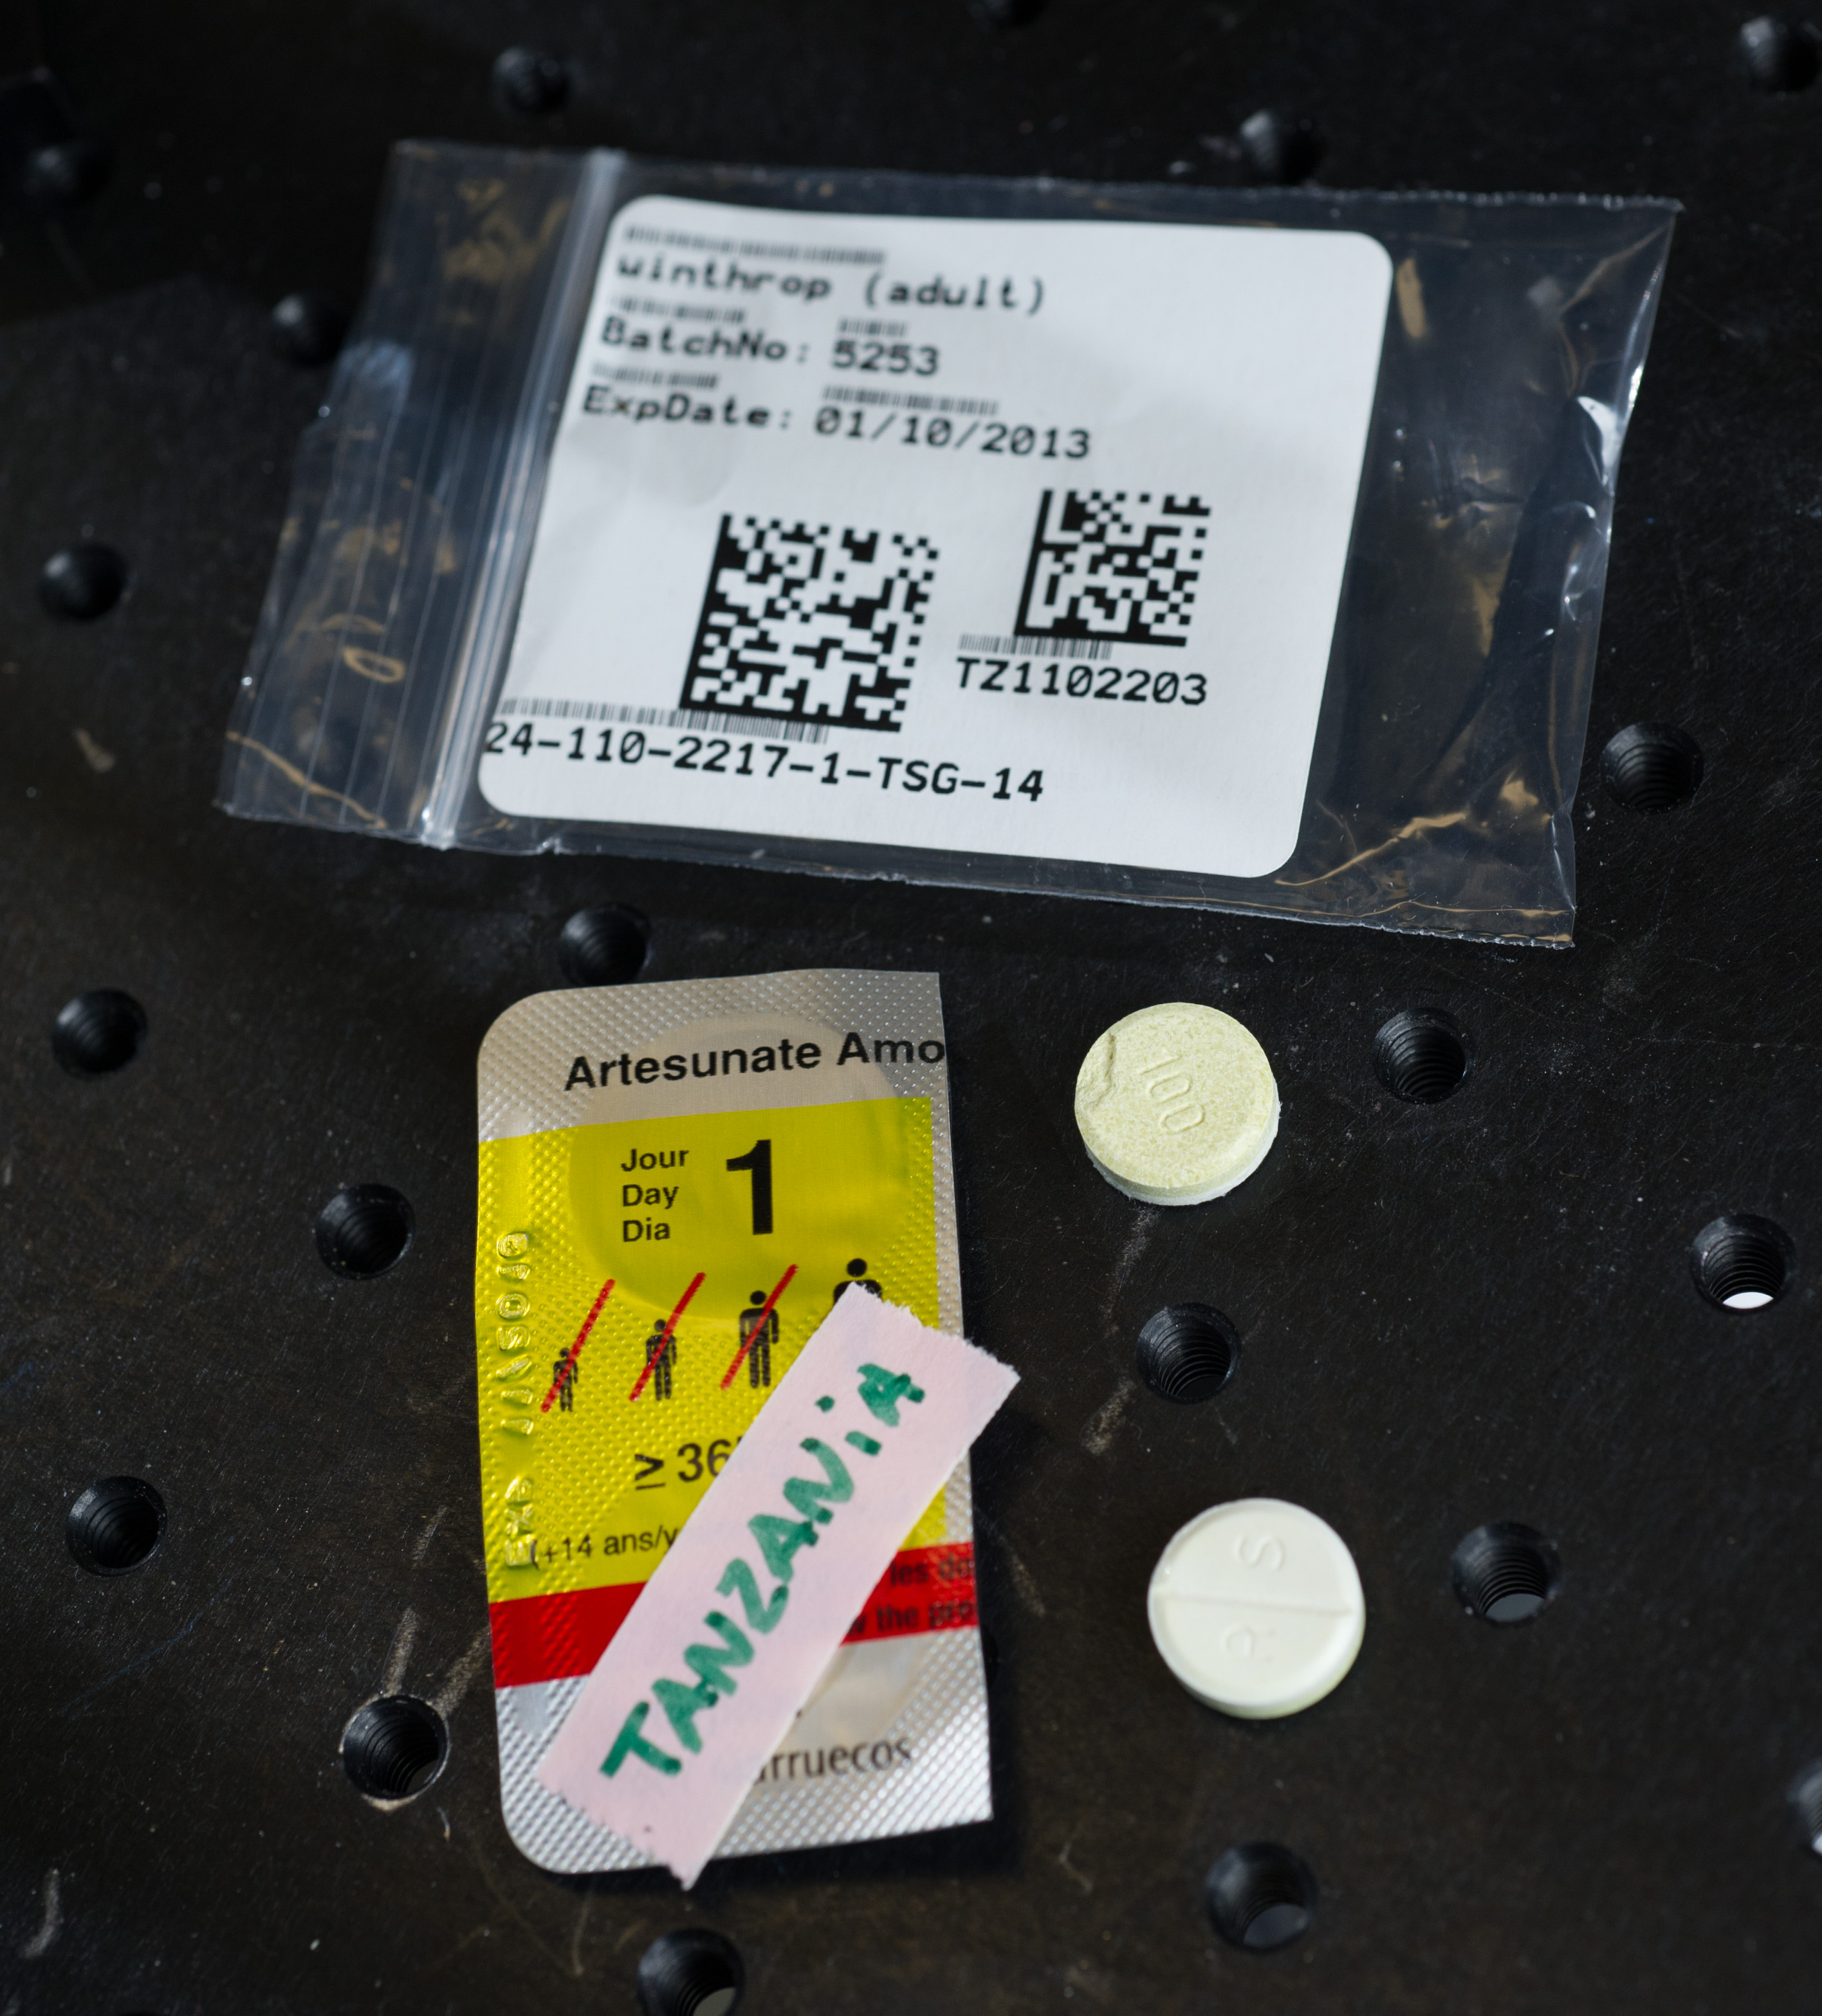 A suspected falsified medication that was shipped to Fernandez's lab for analysis